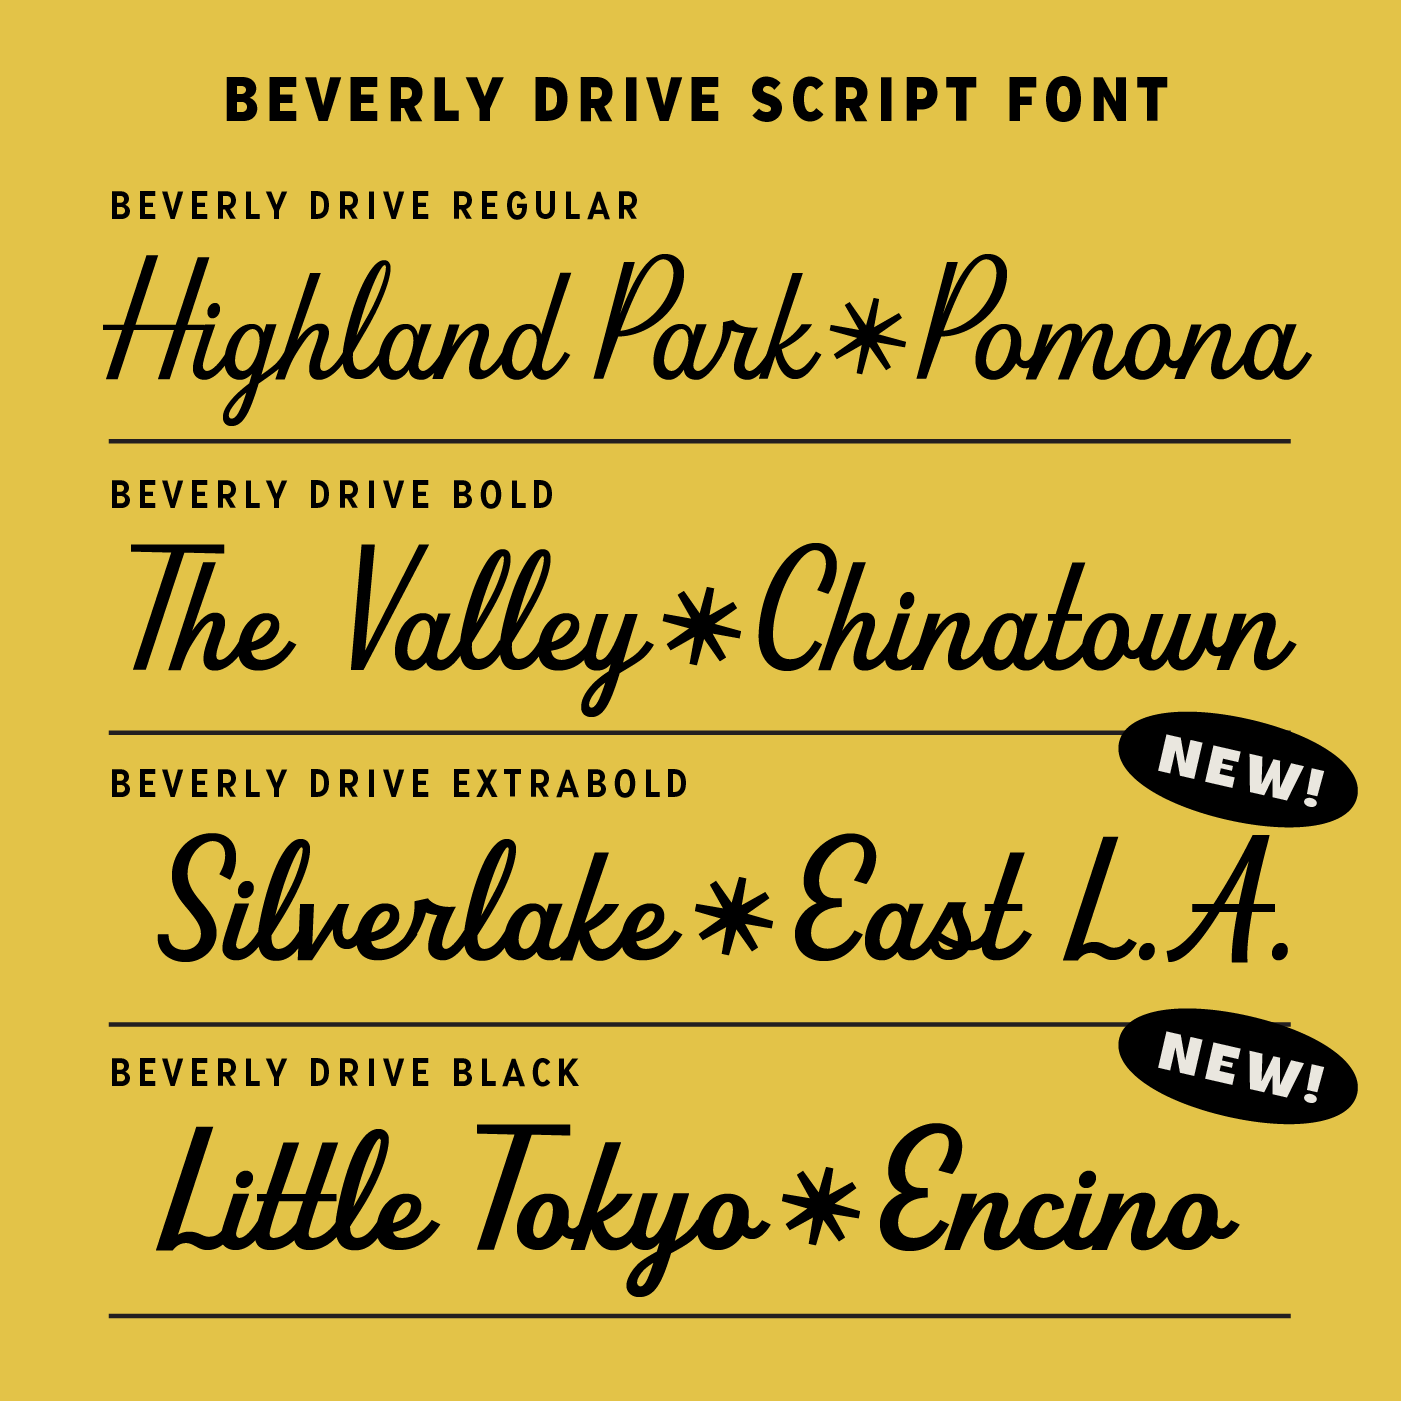 Beverly Drive Right script font 4 weights Cover